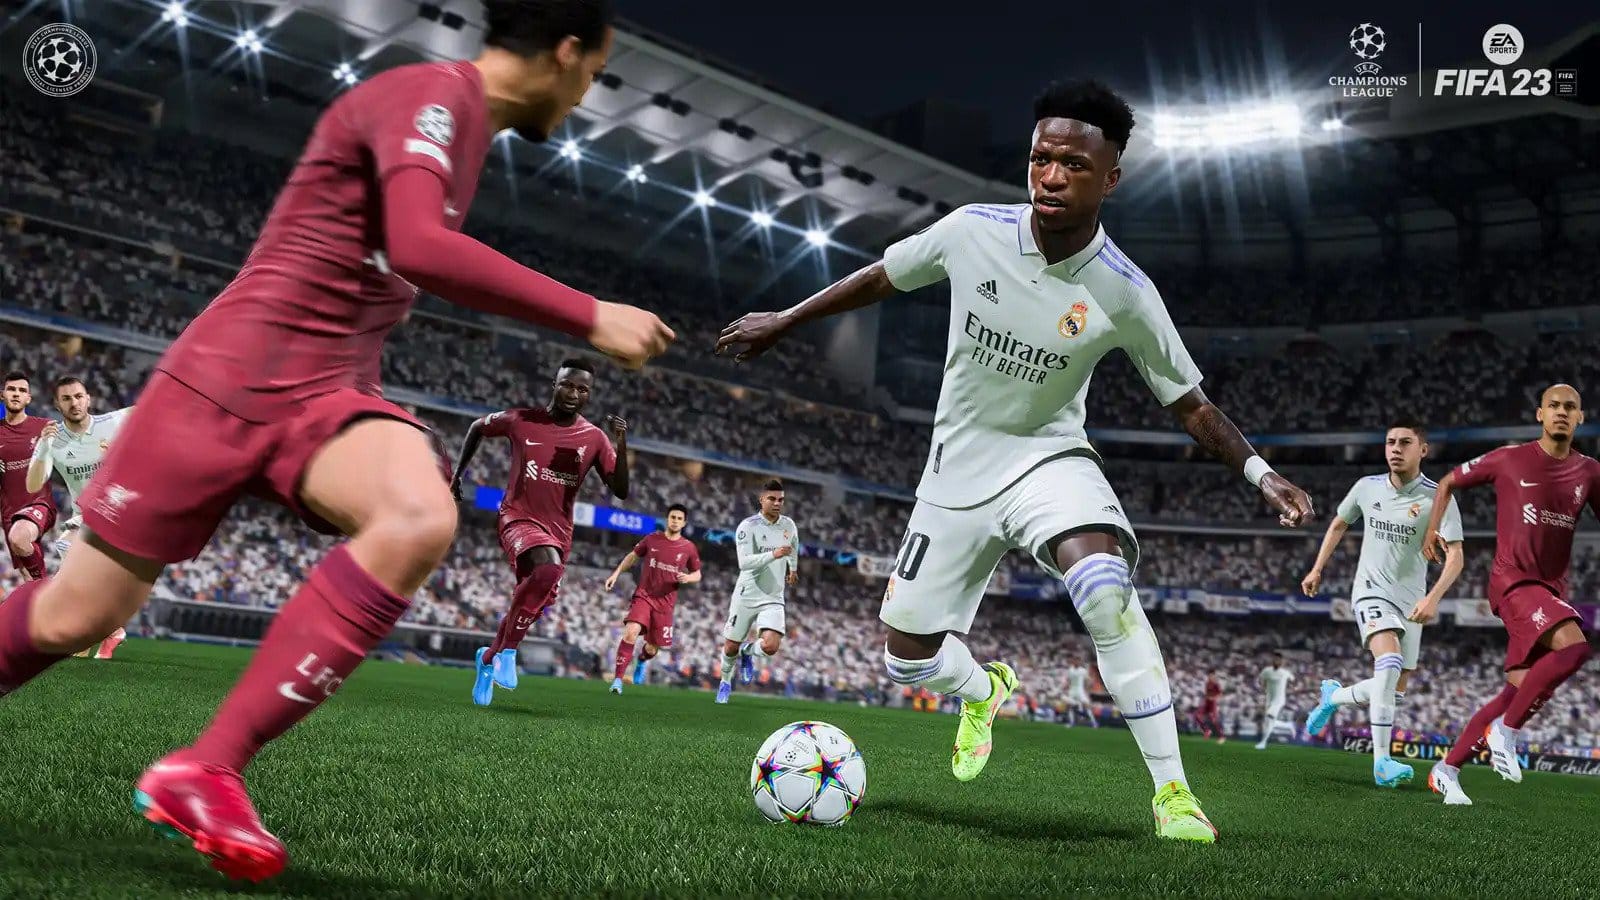 FIFA 23's World Cup update will be seasonal content, not a